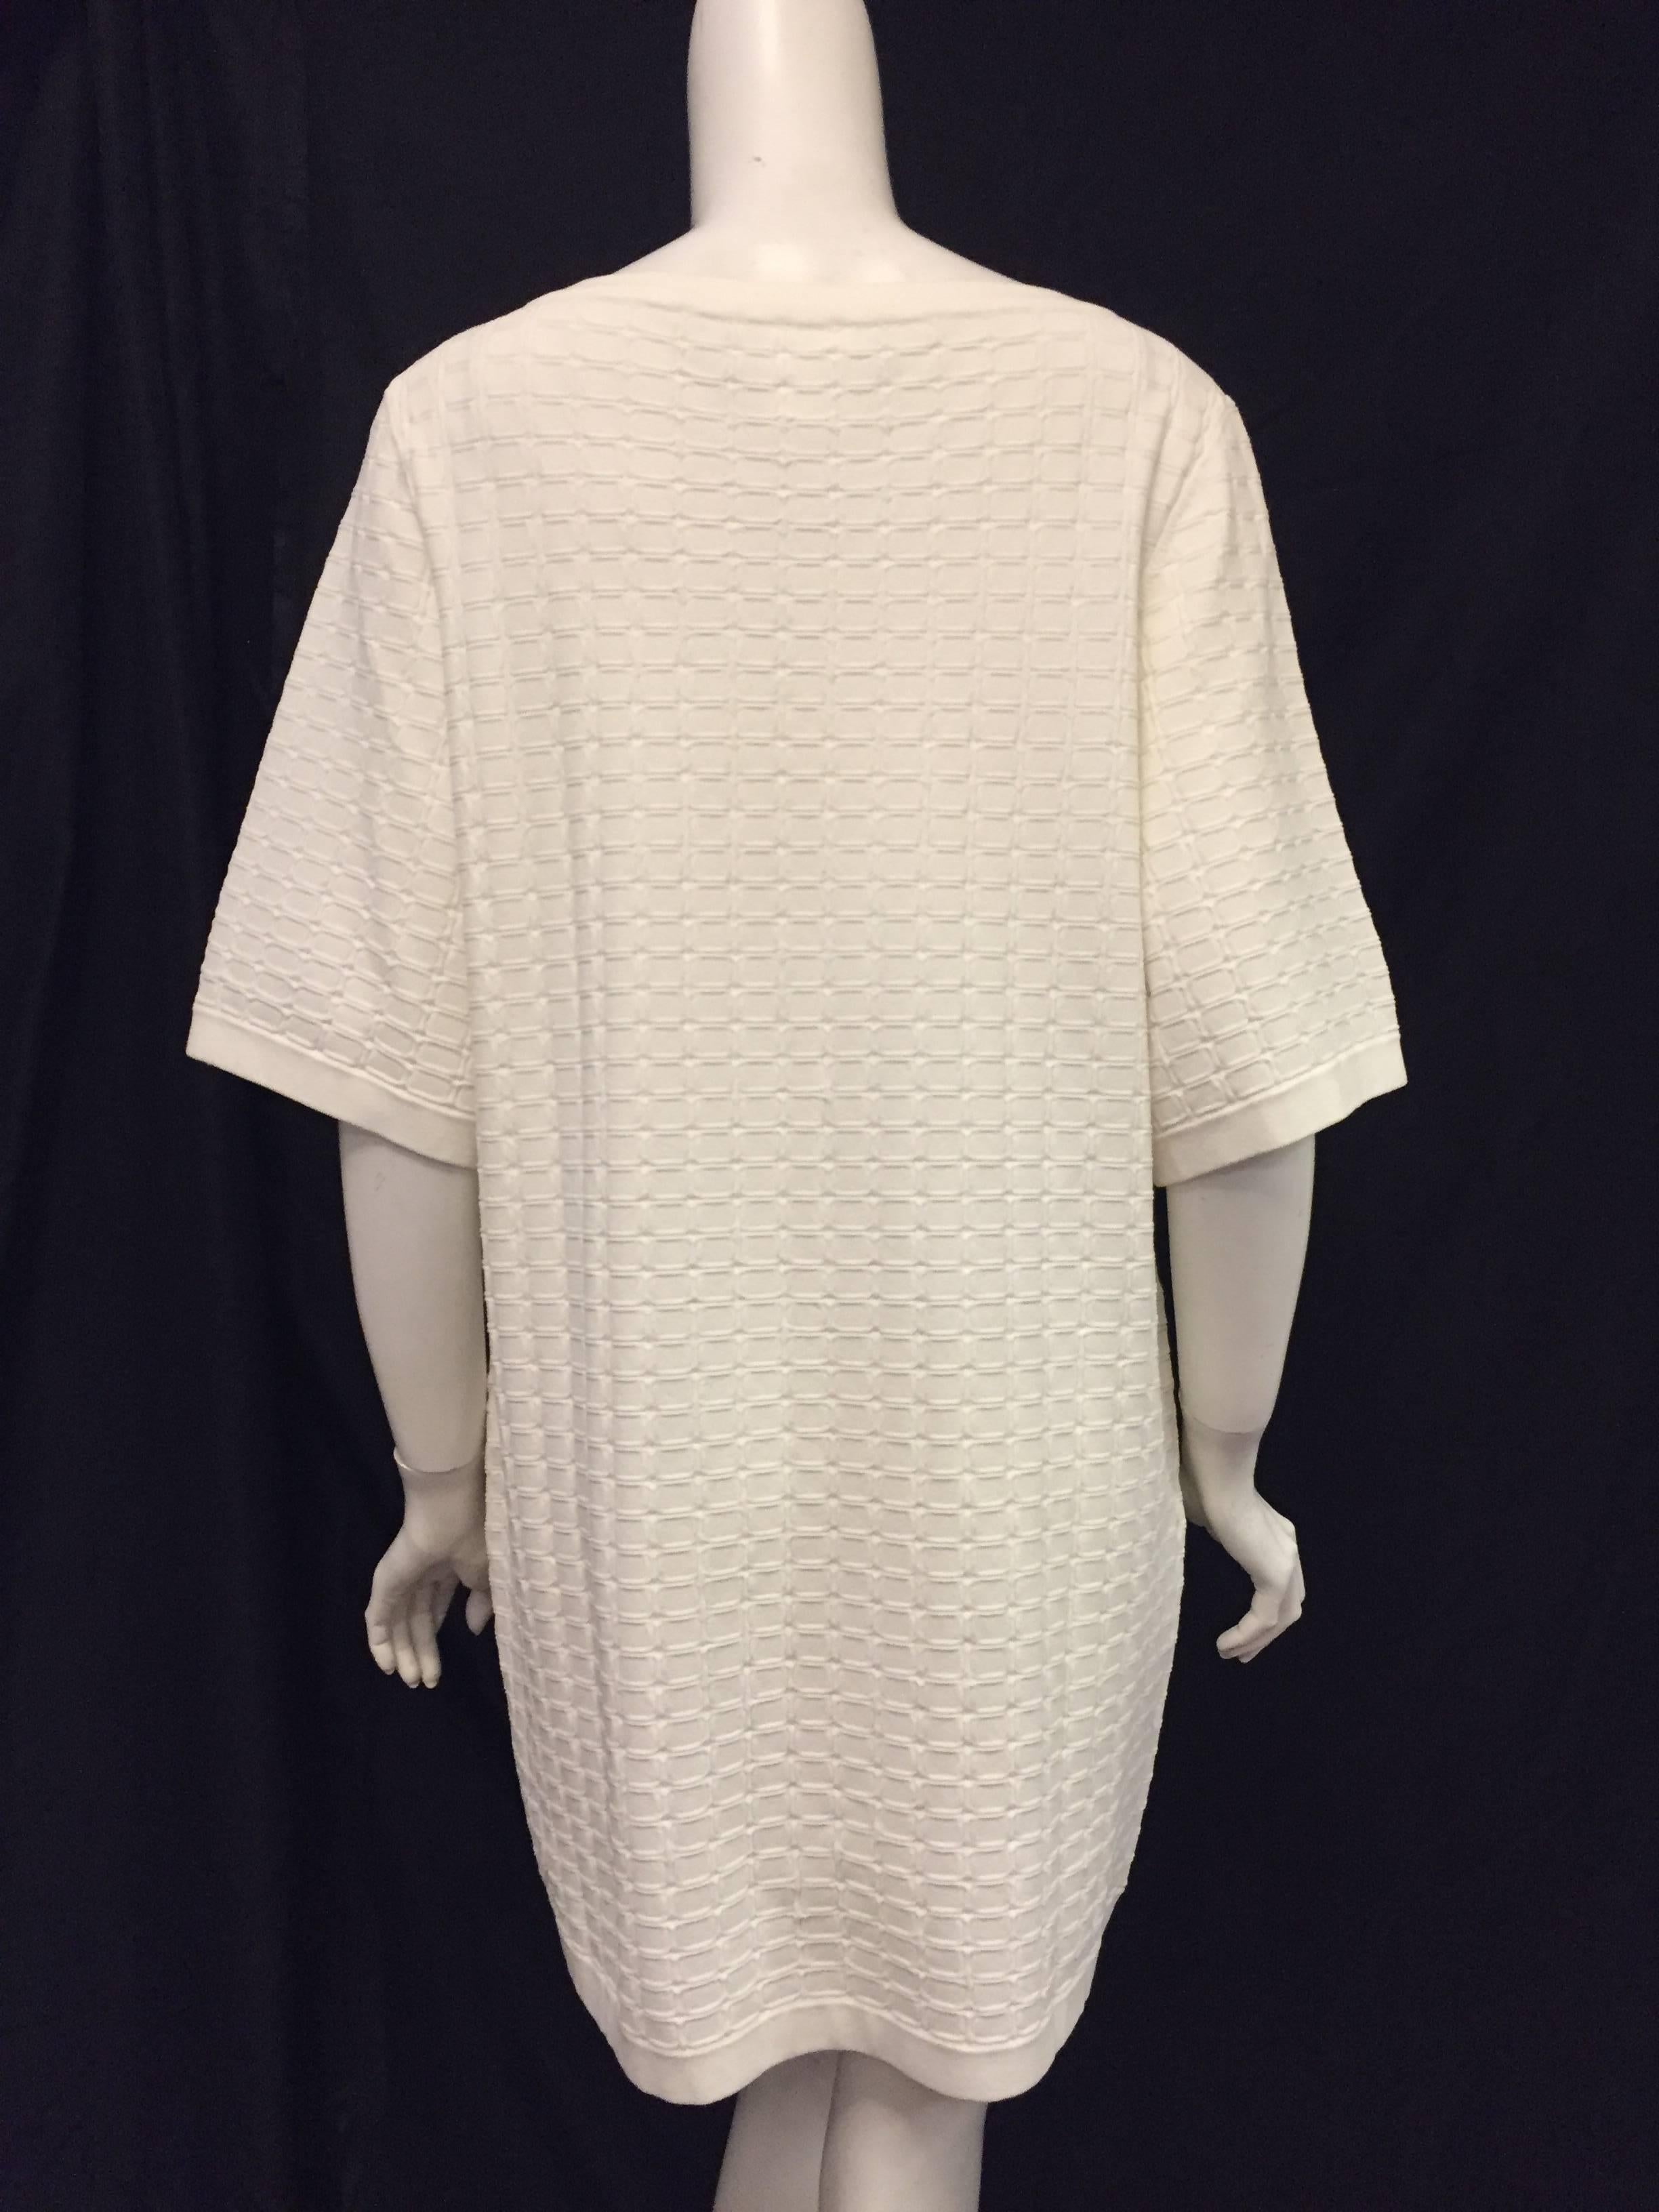 Women's Chanel Cruise Collection White Cotton Blend Dress